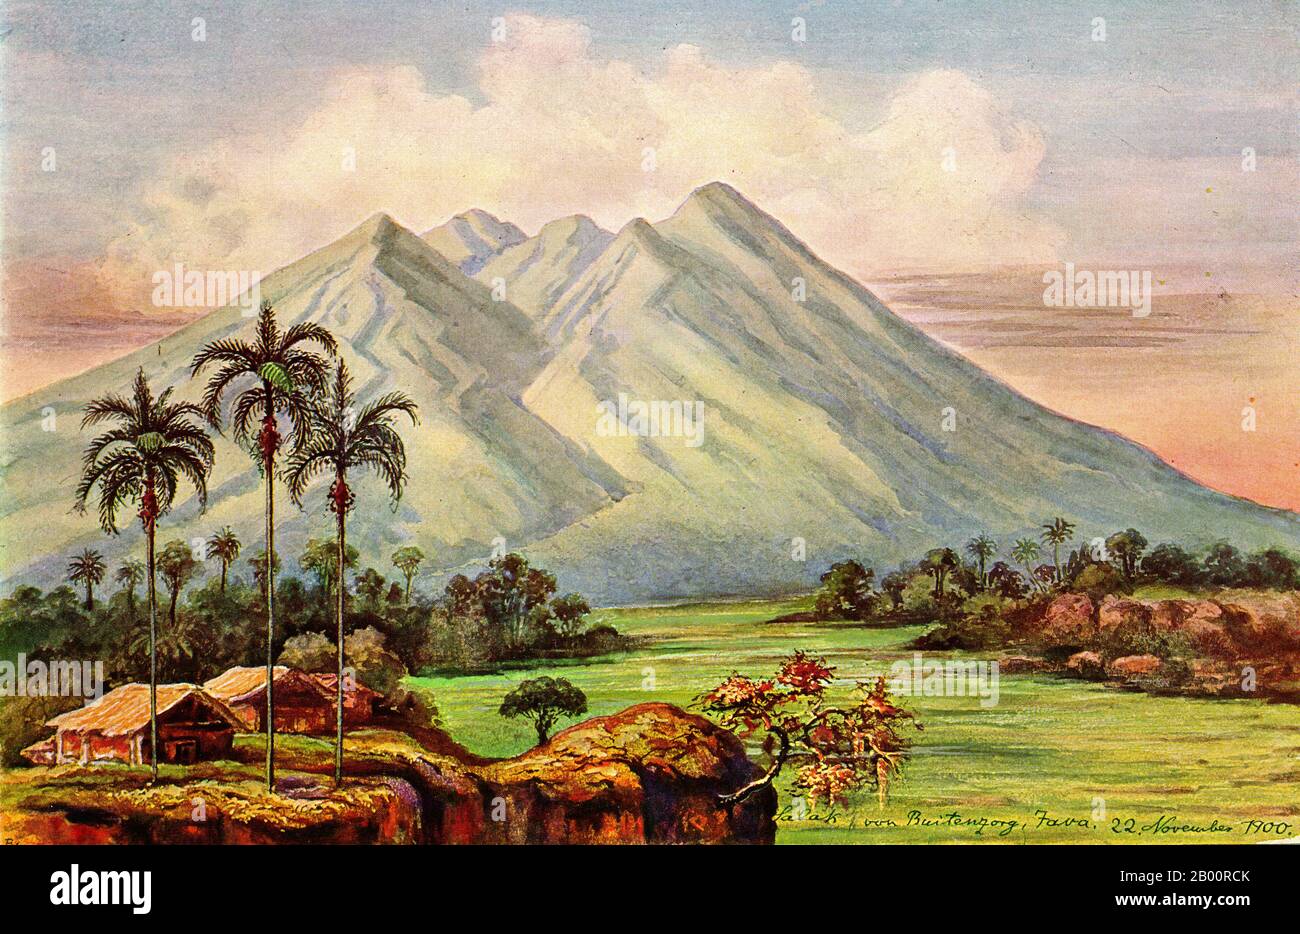 Indonesia/Germany: 'Salak Volcano, near Bogor, Java'. Watercolour painting by the German scientist and traveller Ernst Haeckel (1834-1919), 1900.  Ernst Heinrich Philipp August Haeckel (February 16, 1834 – August 9, 1919), also written von Haeckel, was an eminent German biologist, naturalist, philosopher, physician, professor and artist who discovered, described and named thousands of new species, mapped a genealogical tree relating all life forms, and coined many terms in biology, including anthropogeny, ecology, phylum, phylogeny, and the kingdom Protista. Stock Photo